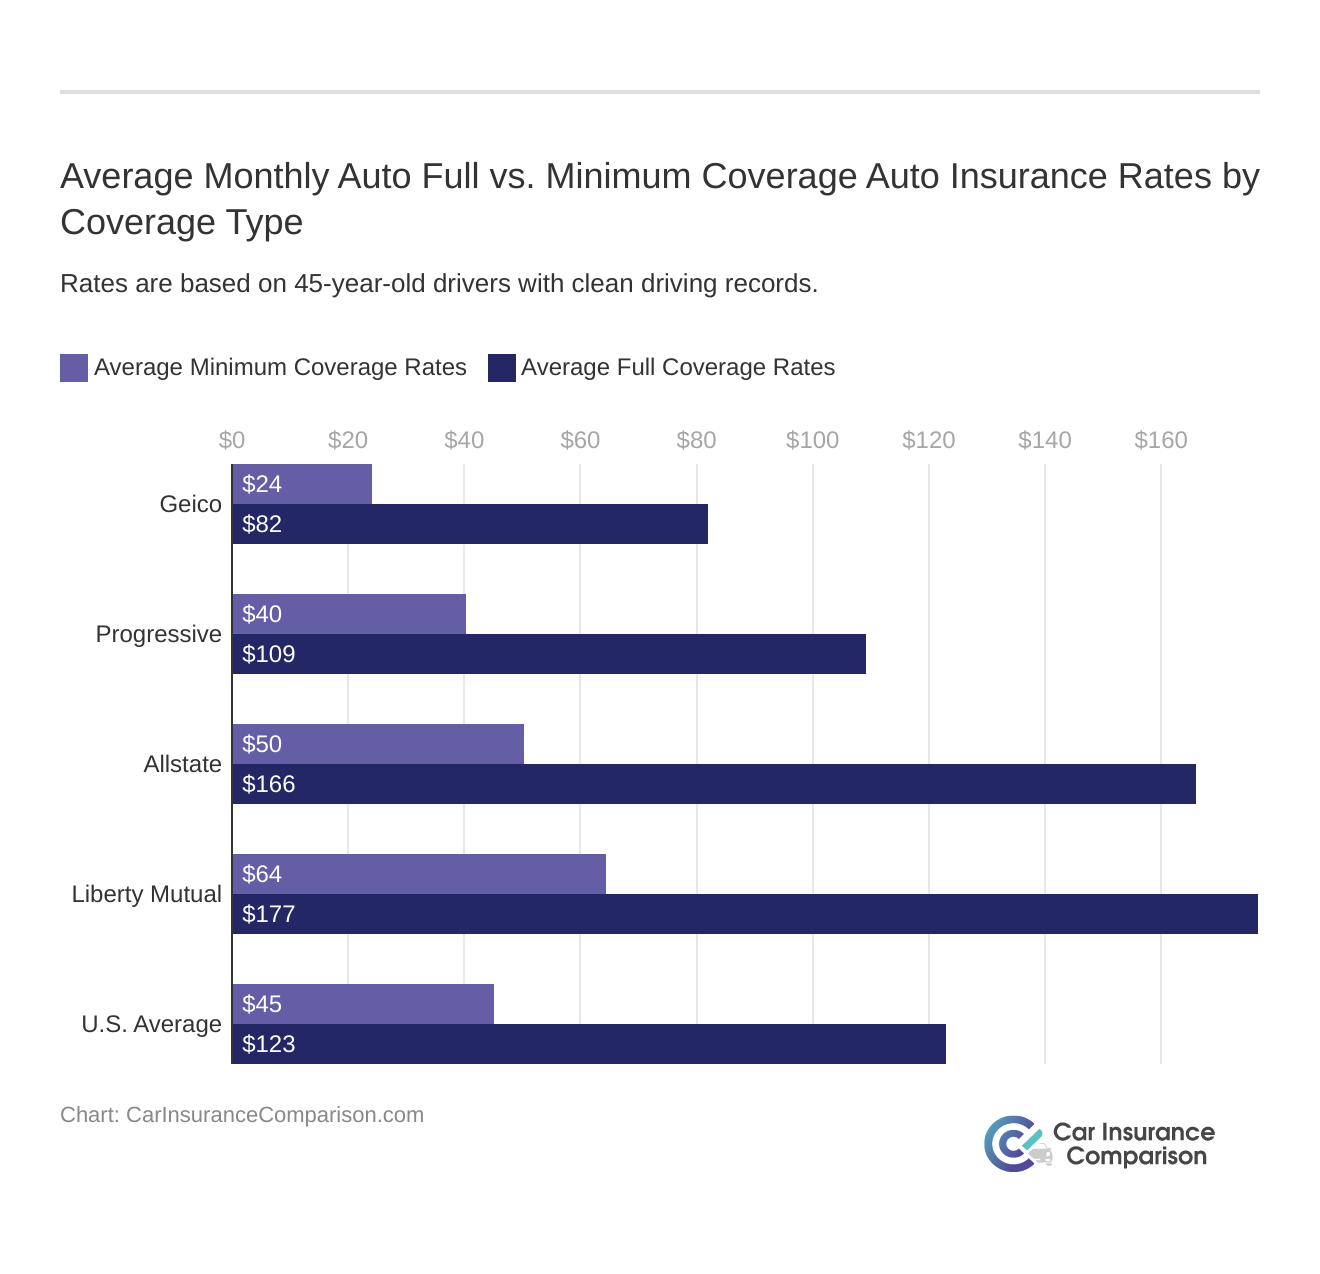 Average Monthly Auto Full vs. Minimum Coverage Auto Insurance Rates by Coverage Type